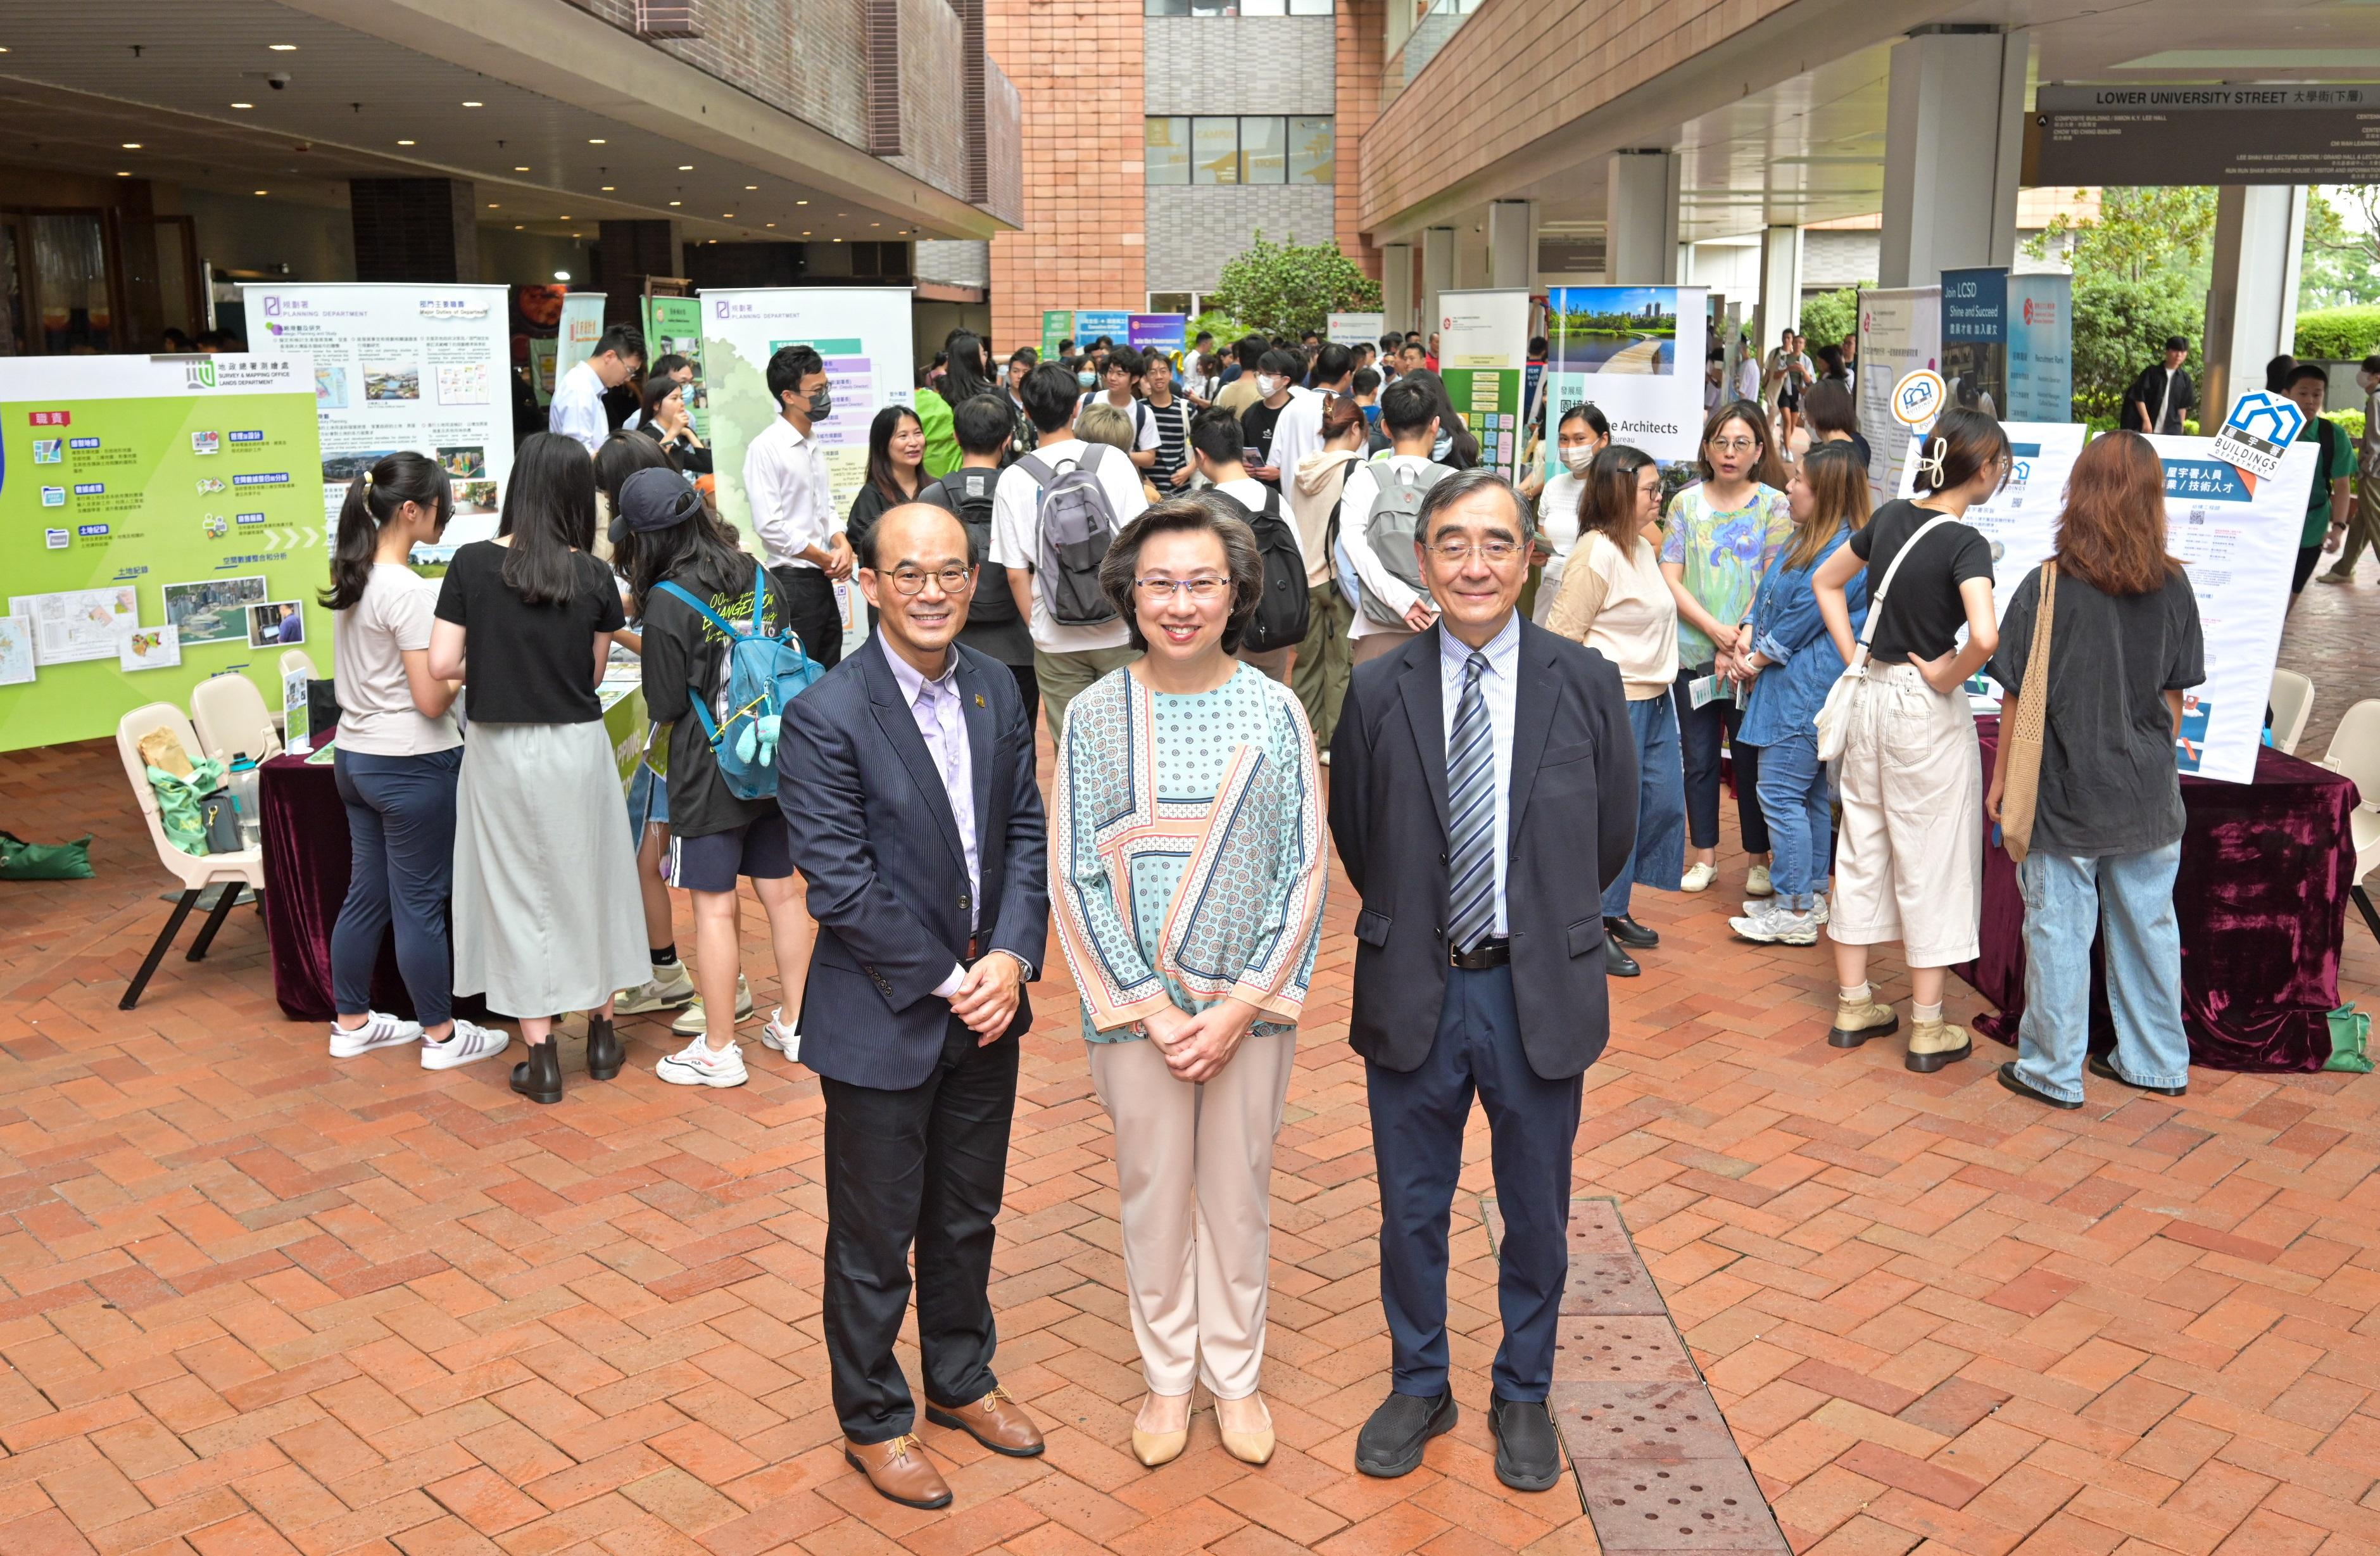 The Secretary for the Civil Service, Mrs Ingrid Yeung, visited the University of Hong Kong today (September 14). She toured the Government Career Fair being held at the campus with the Provost and Deputy Vice-Chancellor of the university, Professor Richard Wong, and encouraged students to join the civil service to serve the public. Mrs Yeung (centre) is pictured with Professor Wong (right) and the Dean of Student Affairs, Professor Samson Tse (left), at the fair.